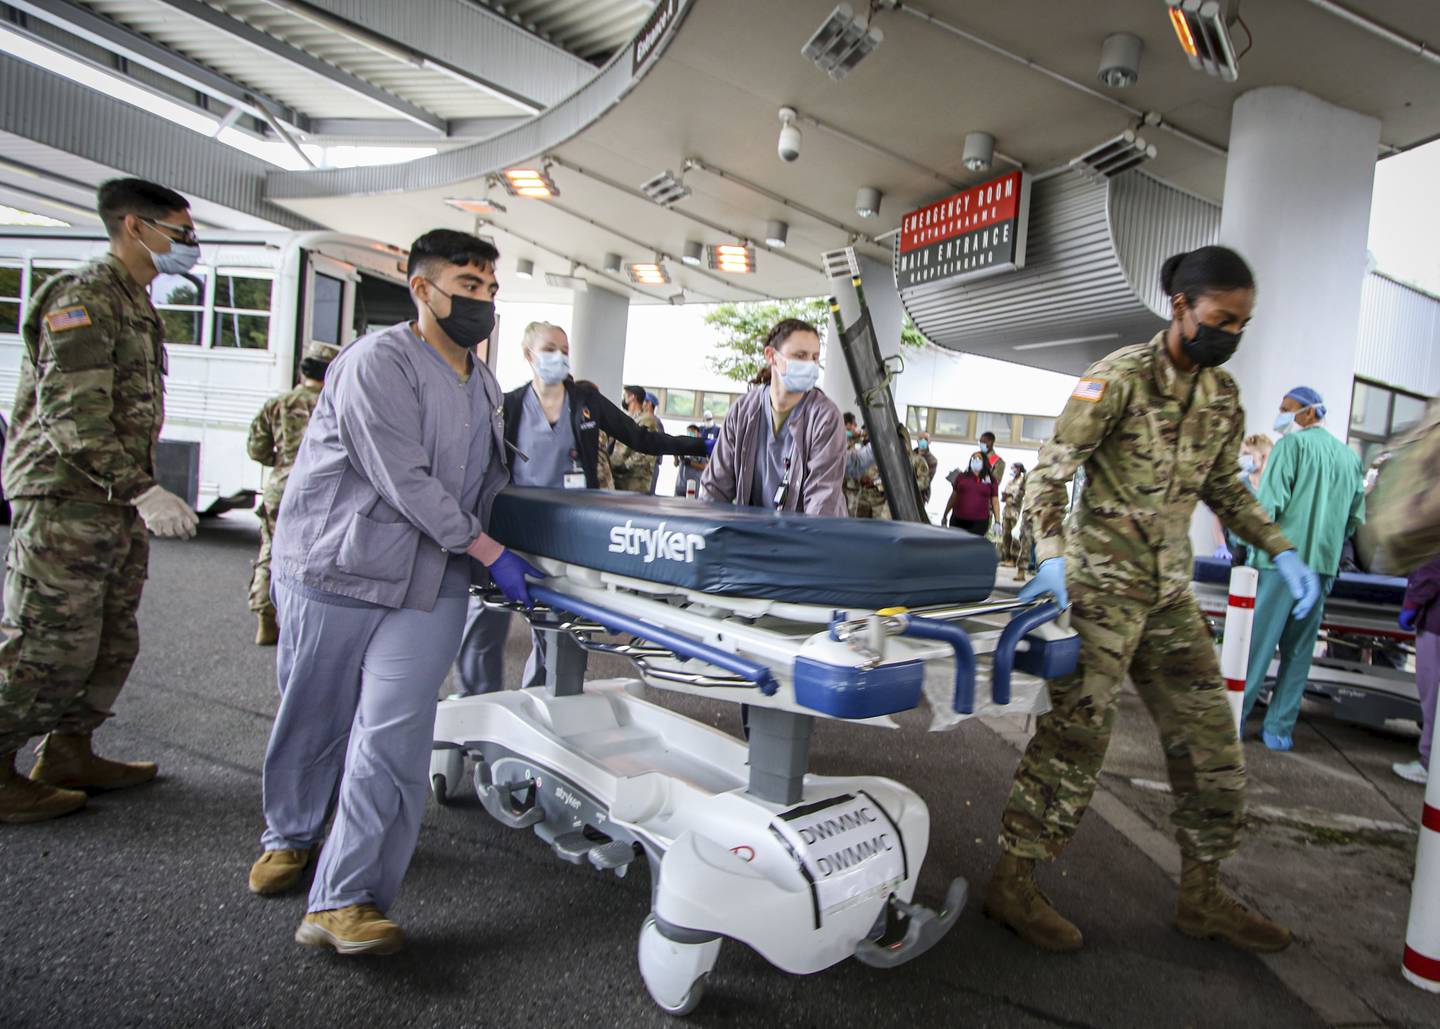 In this image provided by the U.S. Army, soldiers, airmen and civilian staff at Landstuhl Regional Medical Center, Germany, receive injured on Friday, Aug. 27, 2021, who were medically evacuated from Kabul, Afghanistan, after the bombing outside of Hamid Karzai International Airport in Kabul, Afghanistan, on Aug. 26. (Marcy Sanchez/U.S. Army via AP)